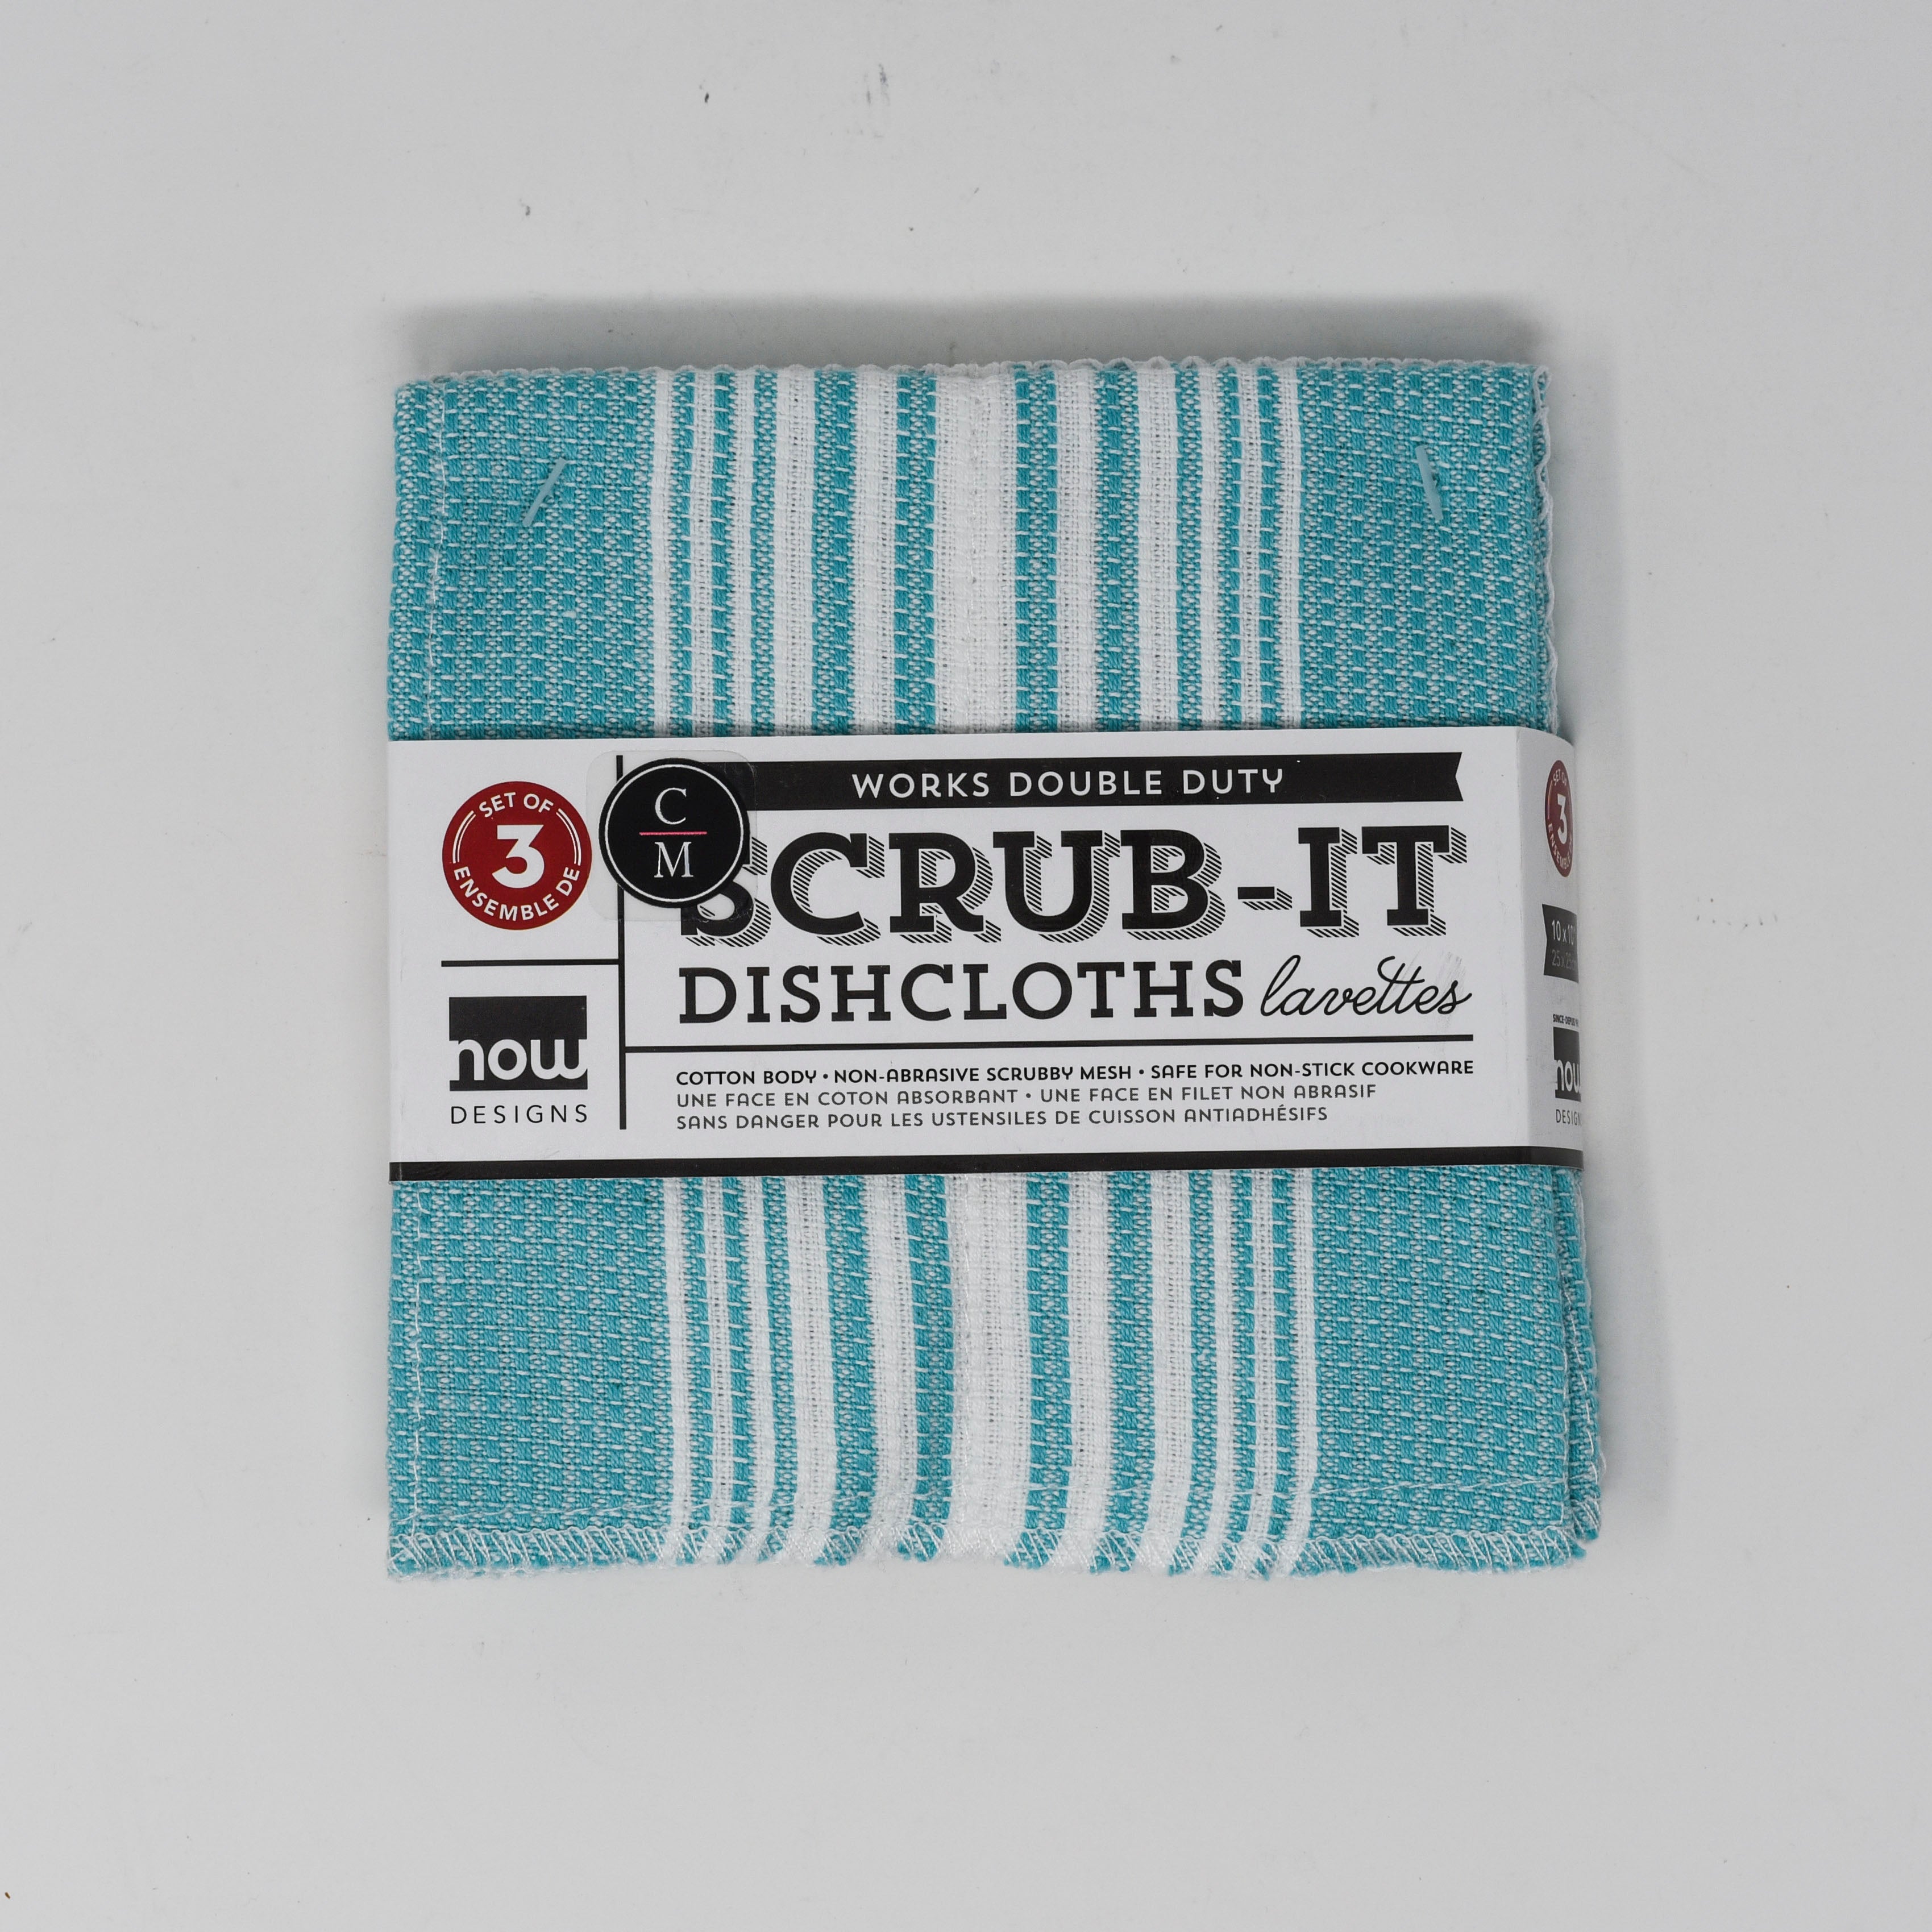 DISH CLOTH W/MESH SCRUB SIDE 2PK MICROFIBER 3AST PRINTS WITH COORDINATING  SOLIDS HT/HOOK - Regent Products Corp.